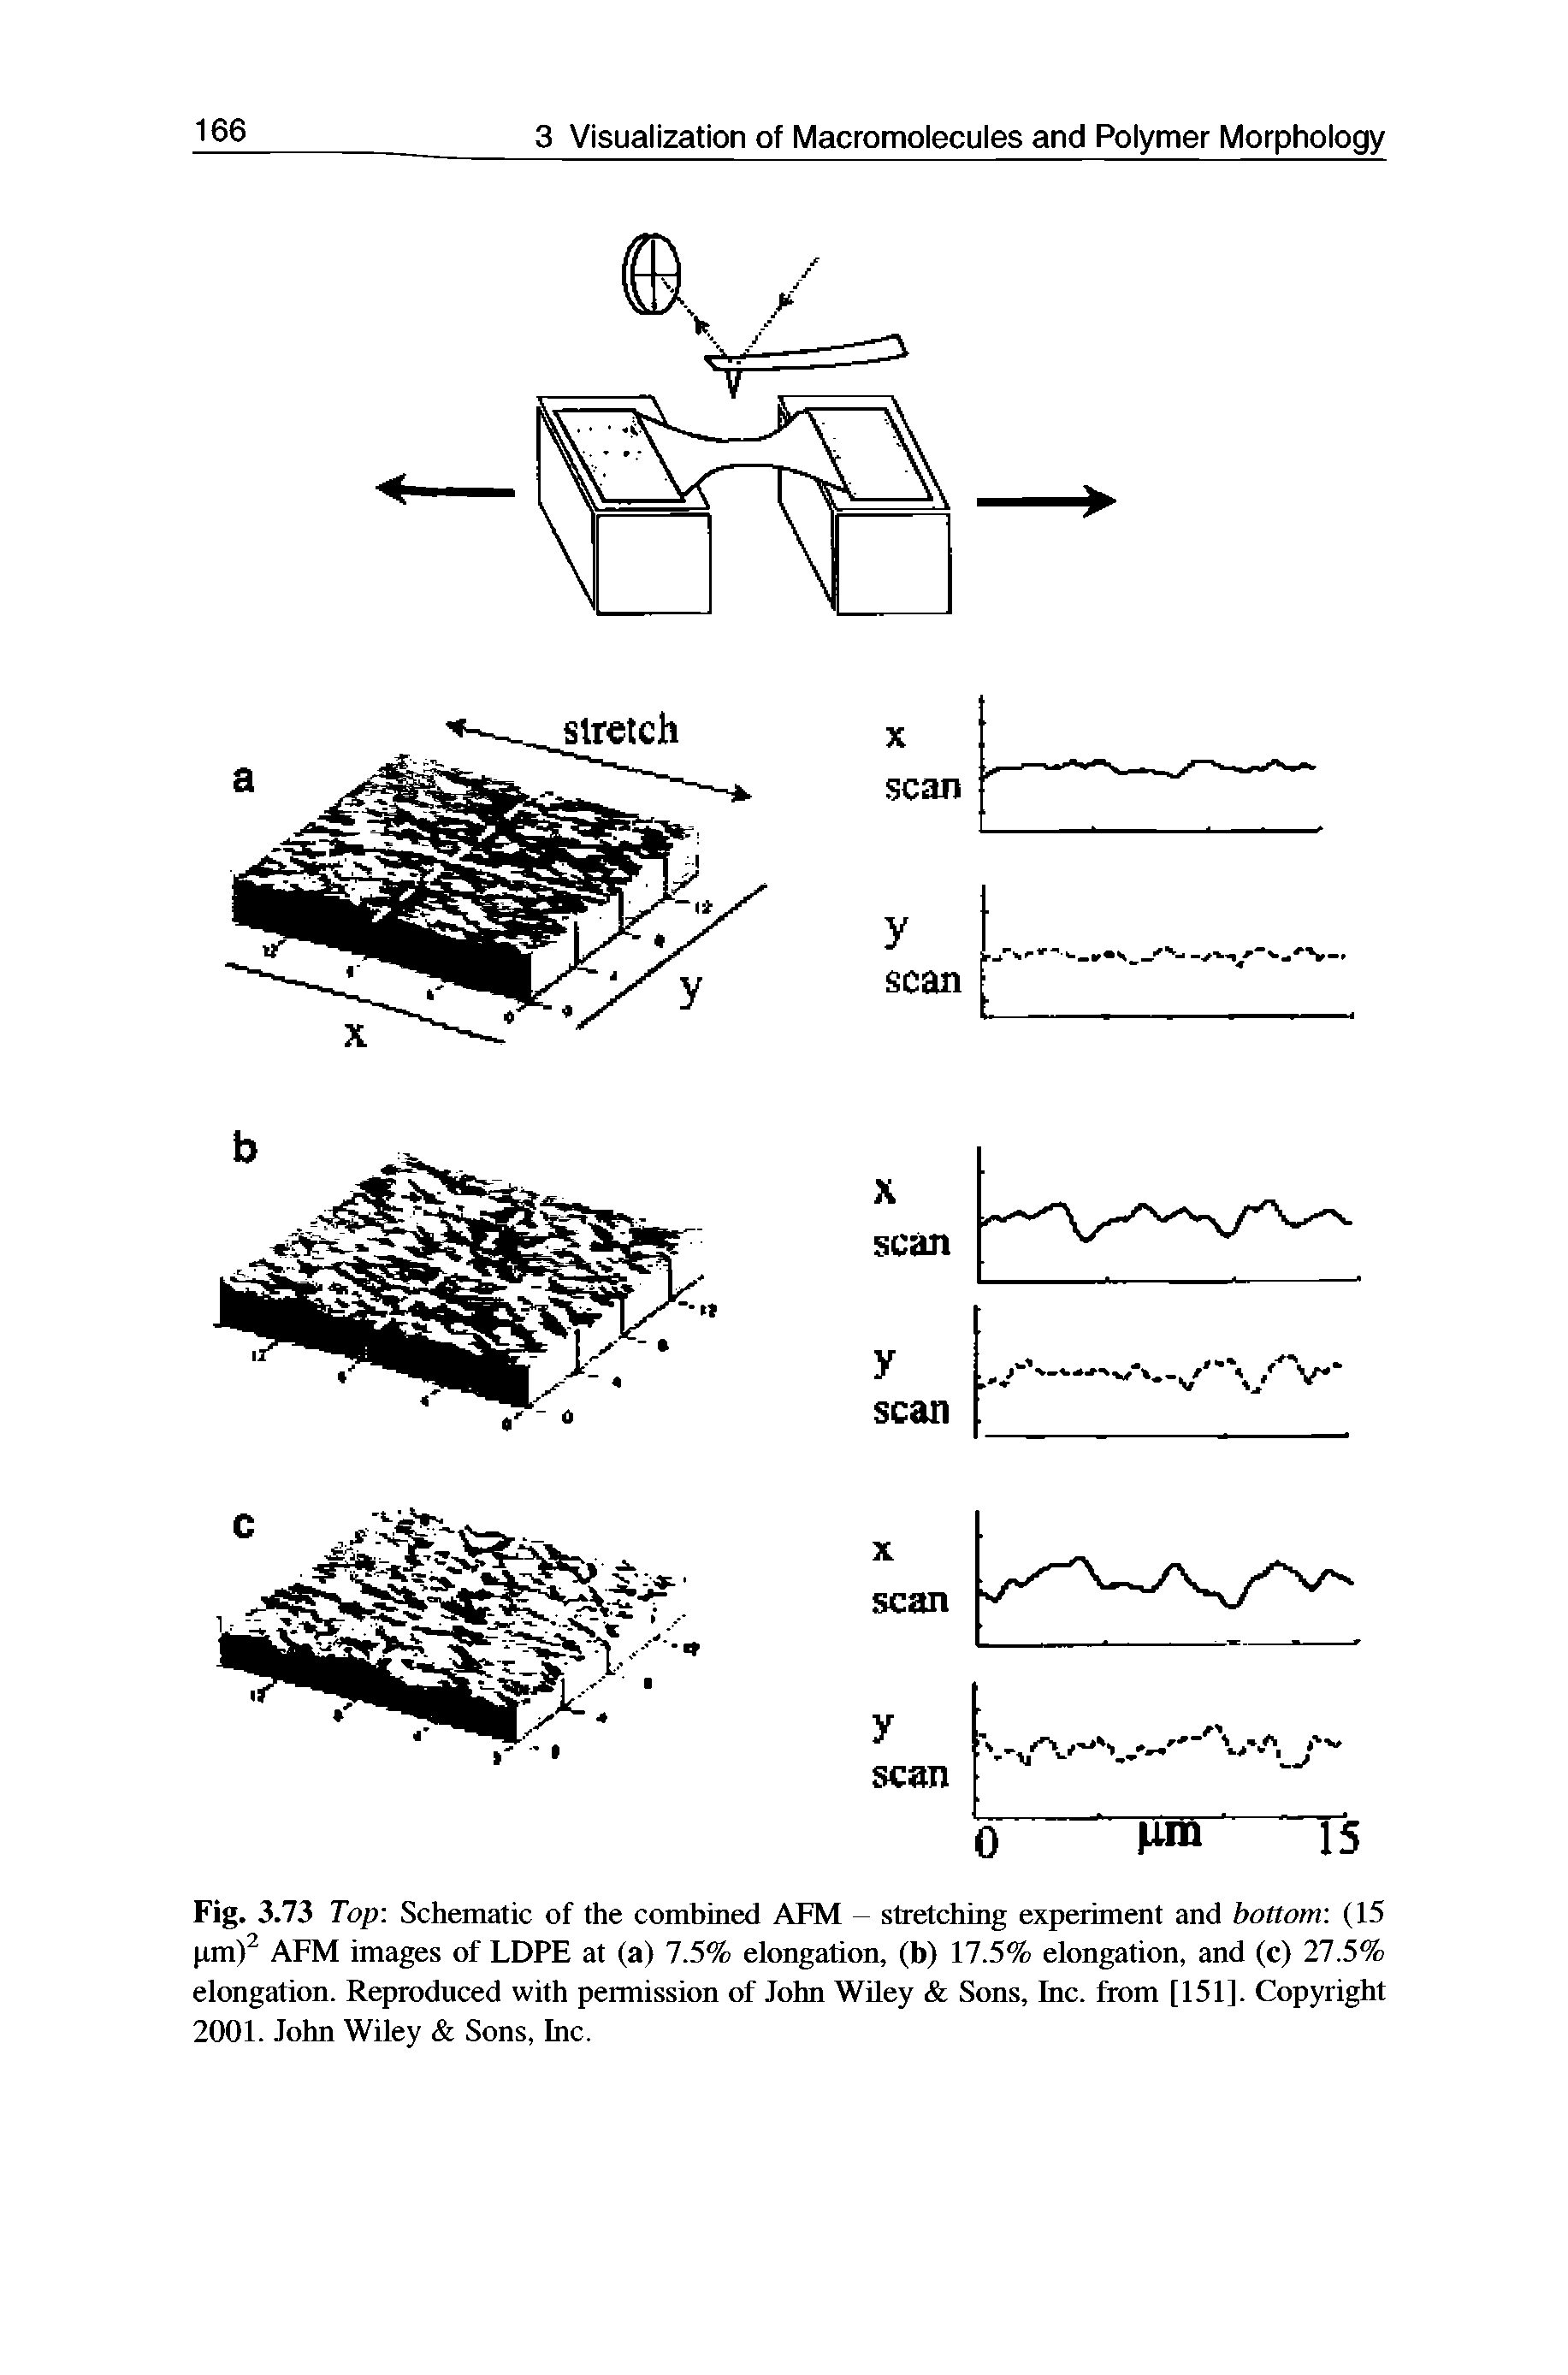 Fig. 3.73 Top Schematic of the combined AFM - stretching experiment and bottom (15 pm)2 AFM images of LDPE at (a) 1.5% elongation, (b) 17.5% elongation, and (c) 27.5% elongation. Reproduced with permission of John Wiley Sons, Inc. from [151]. Copyright 2001. John Wiley Sons, Inc.